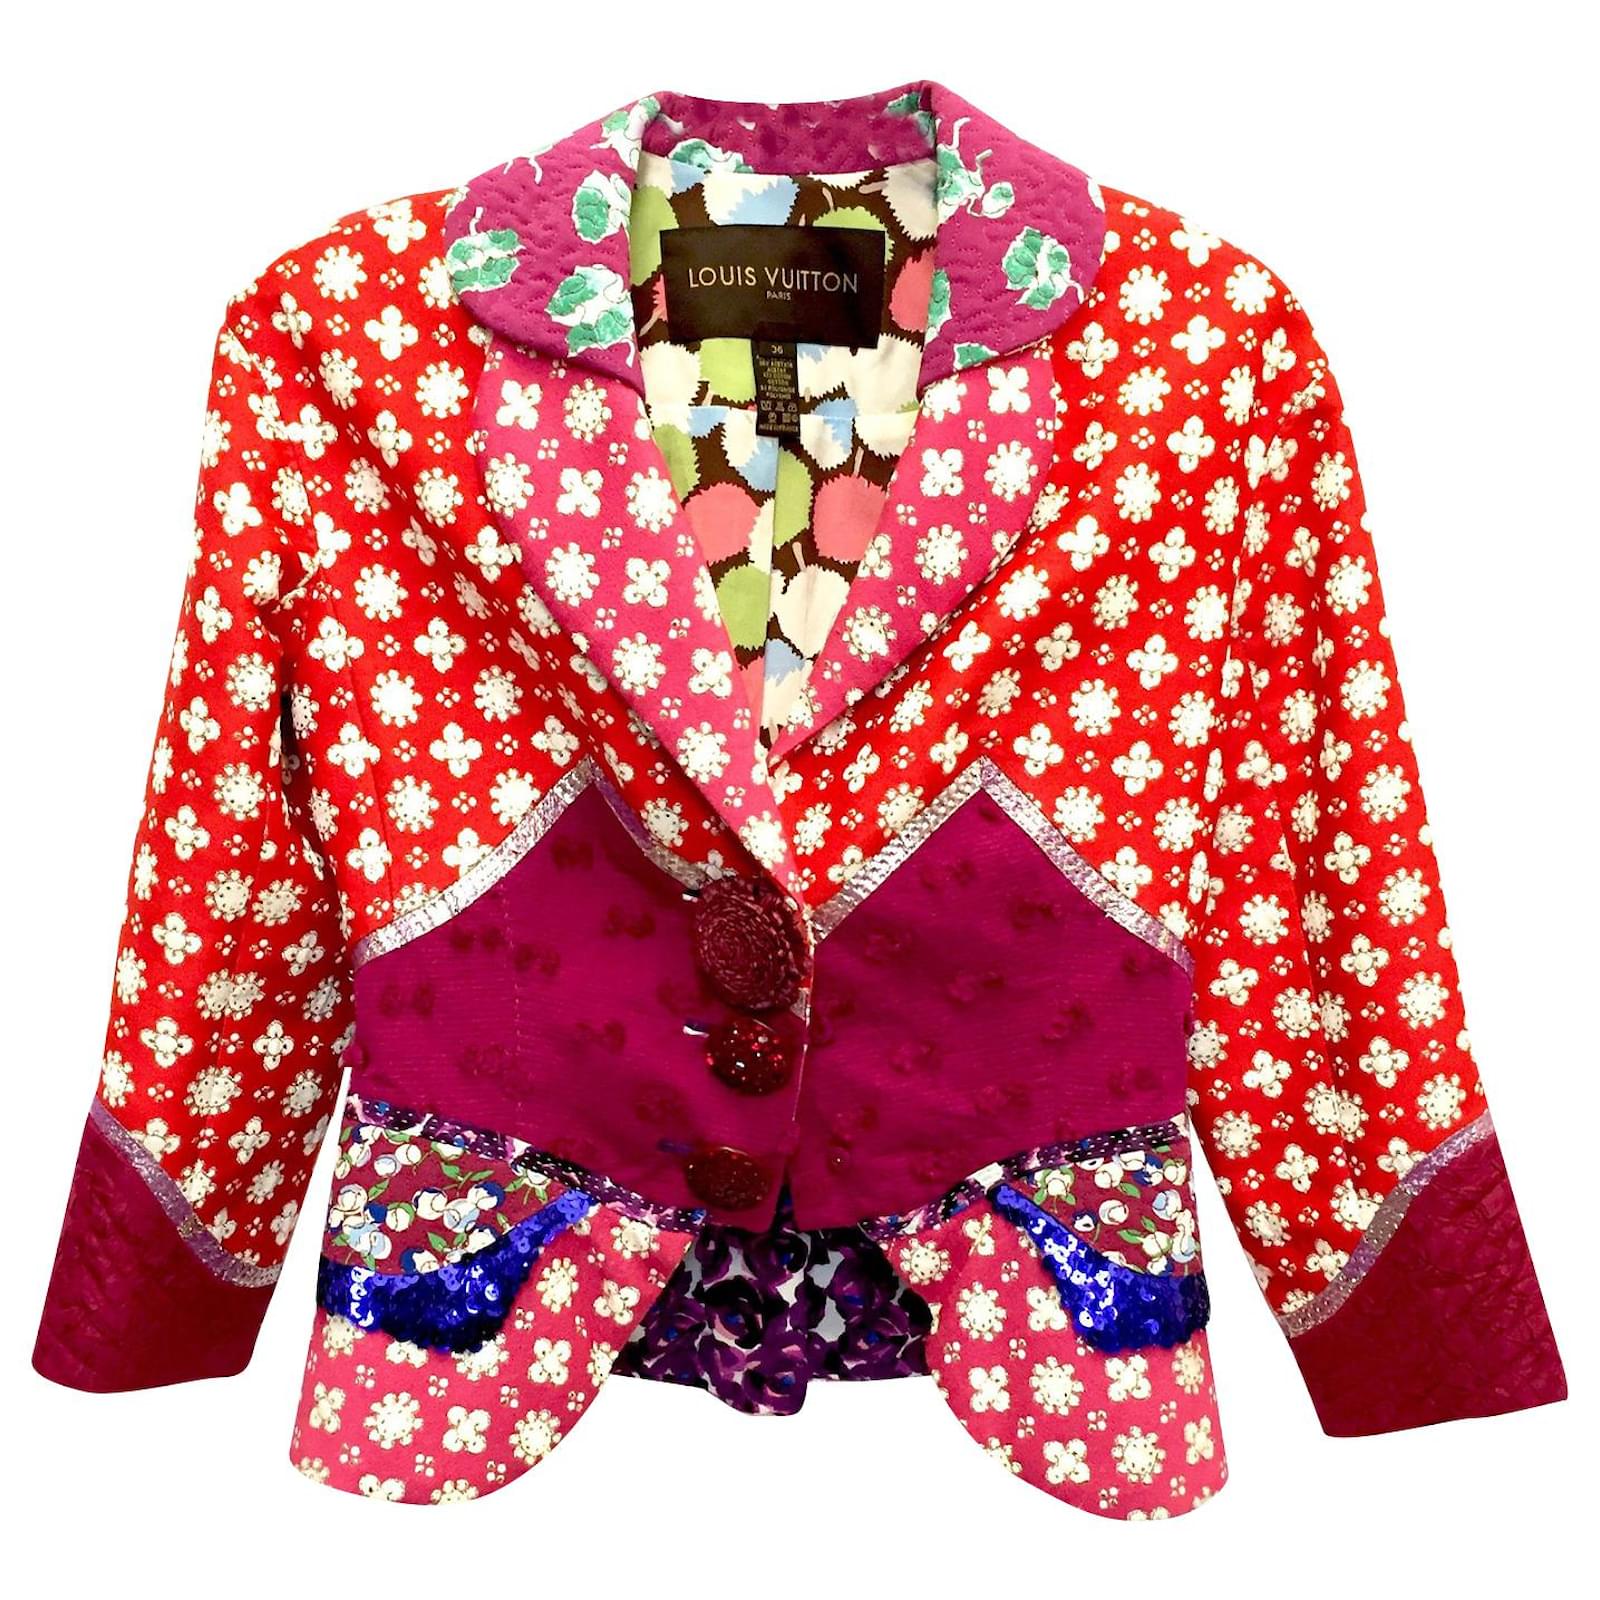 Louis Vuitton red embroidered jacket with white flower pattern